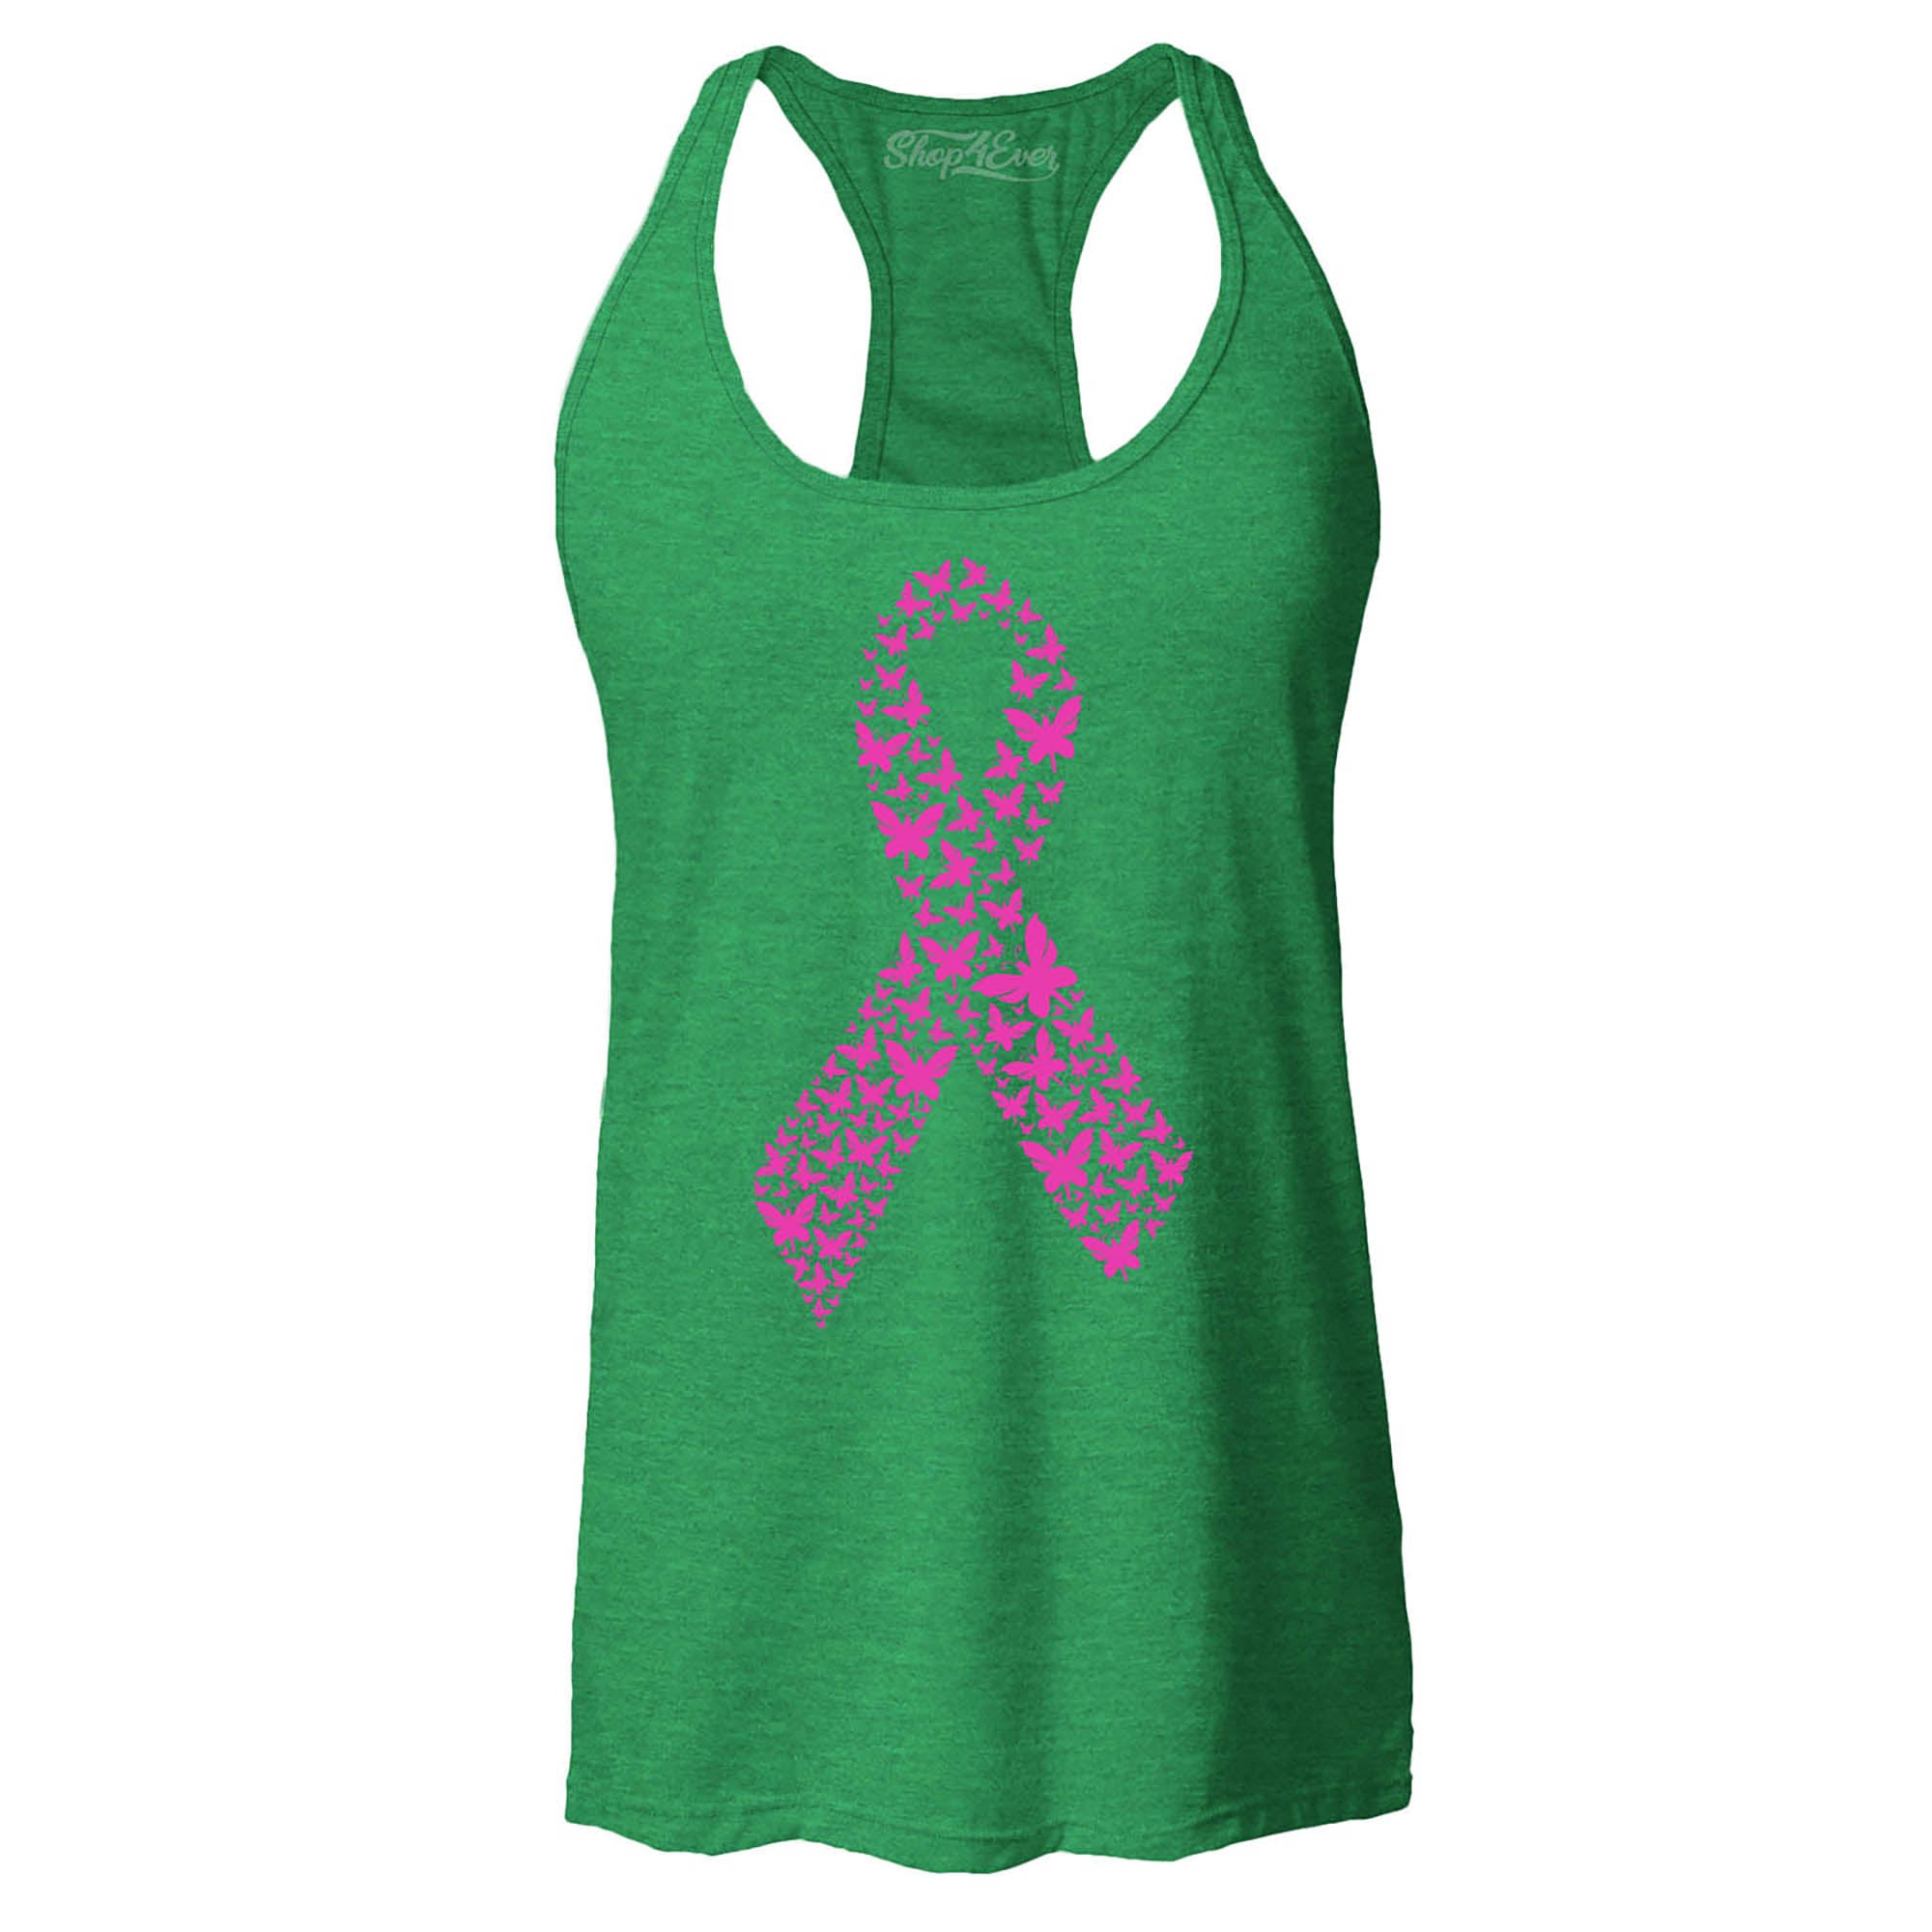 Pink Butterfly Ribbon Breast Cancer Awareness Women's Racerback Tank Top Slim Fit